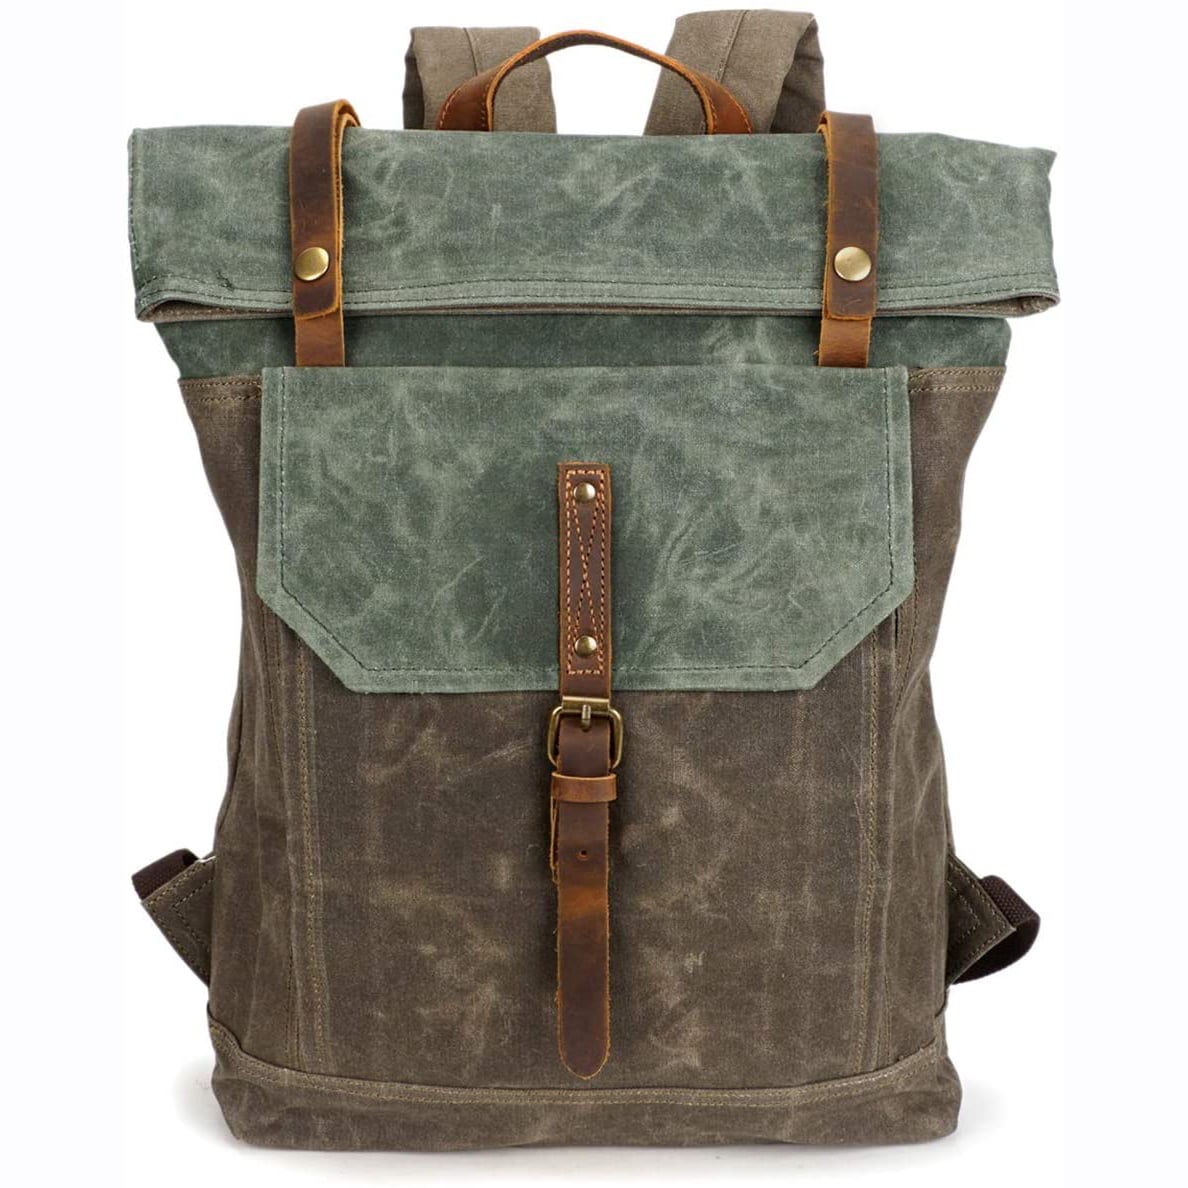 Waxed Canvas Backpack, Leather and Travel Bag, Weatherproof Backpack,  Handmade by Real Artisans 